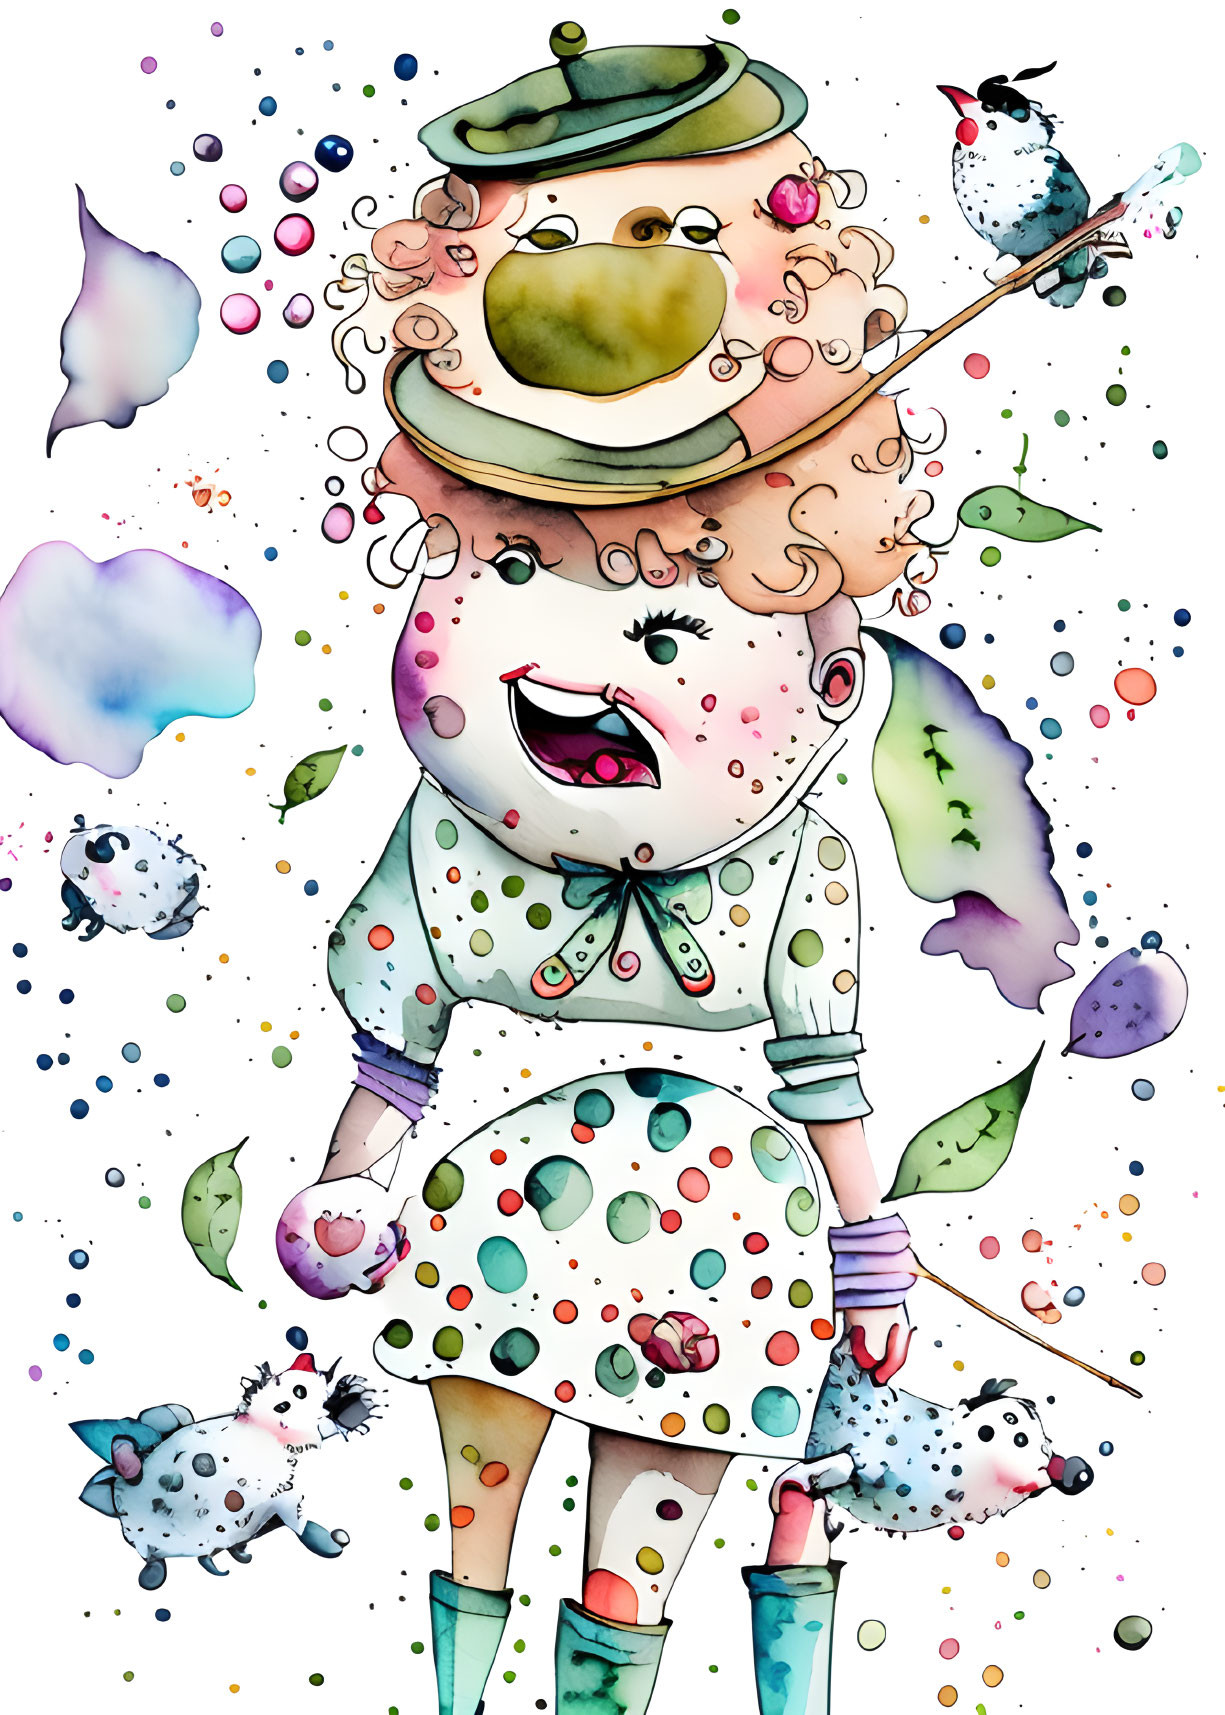 Colorful Watercolor Illustration of Childlike Character Blowing Bubbles